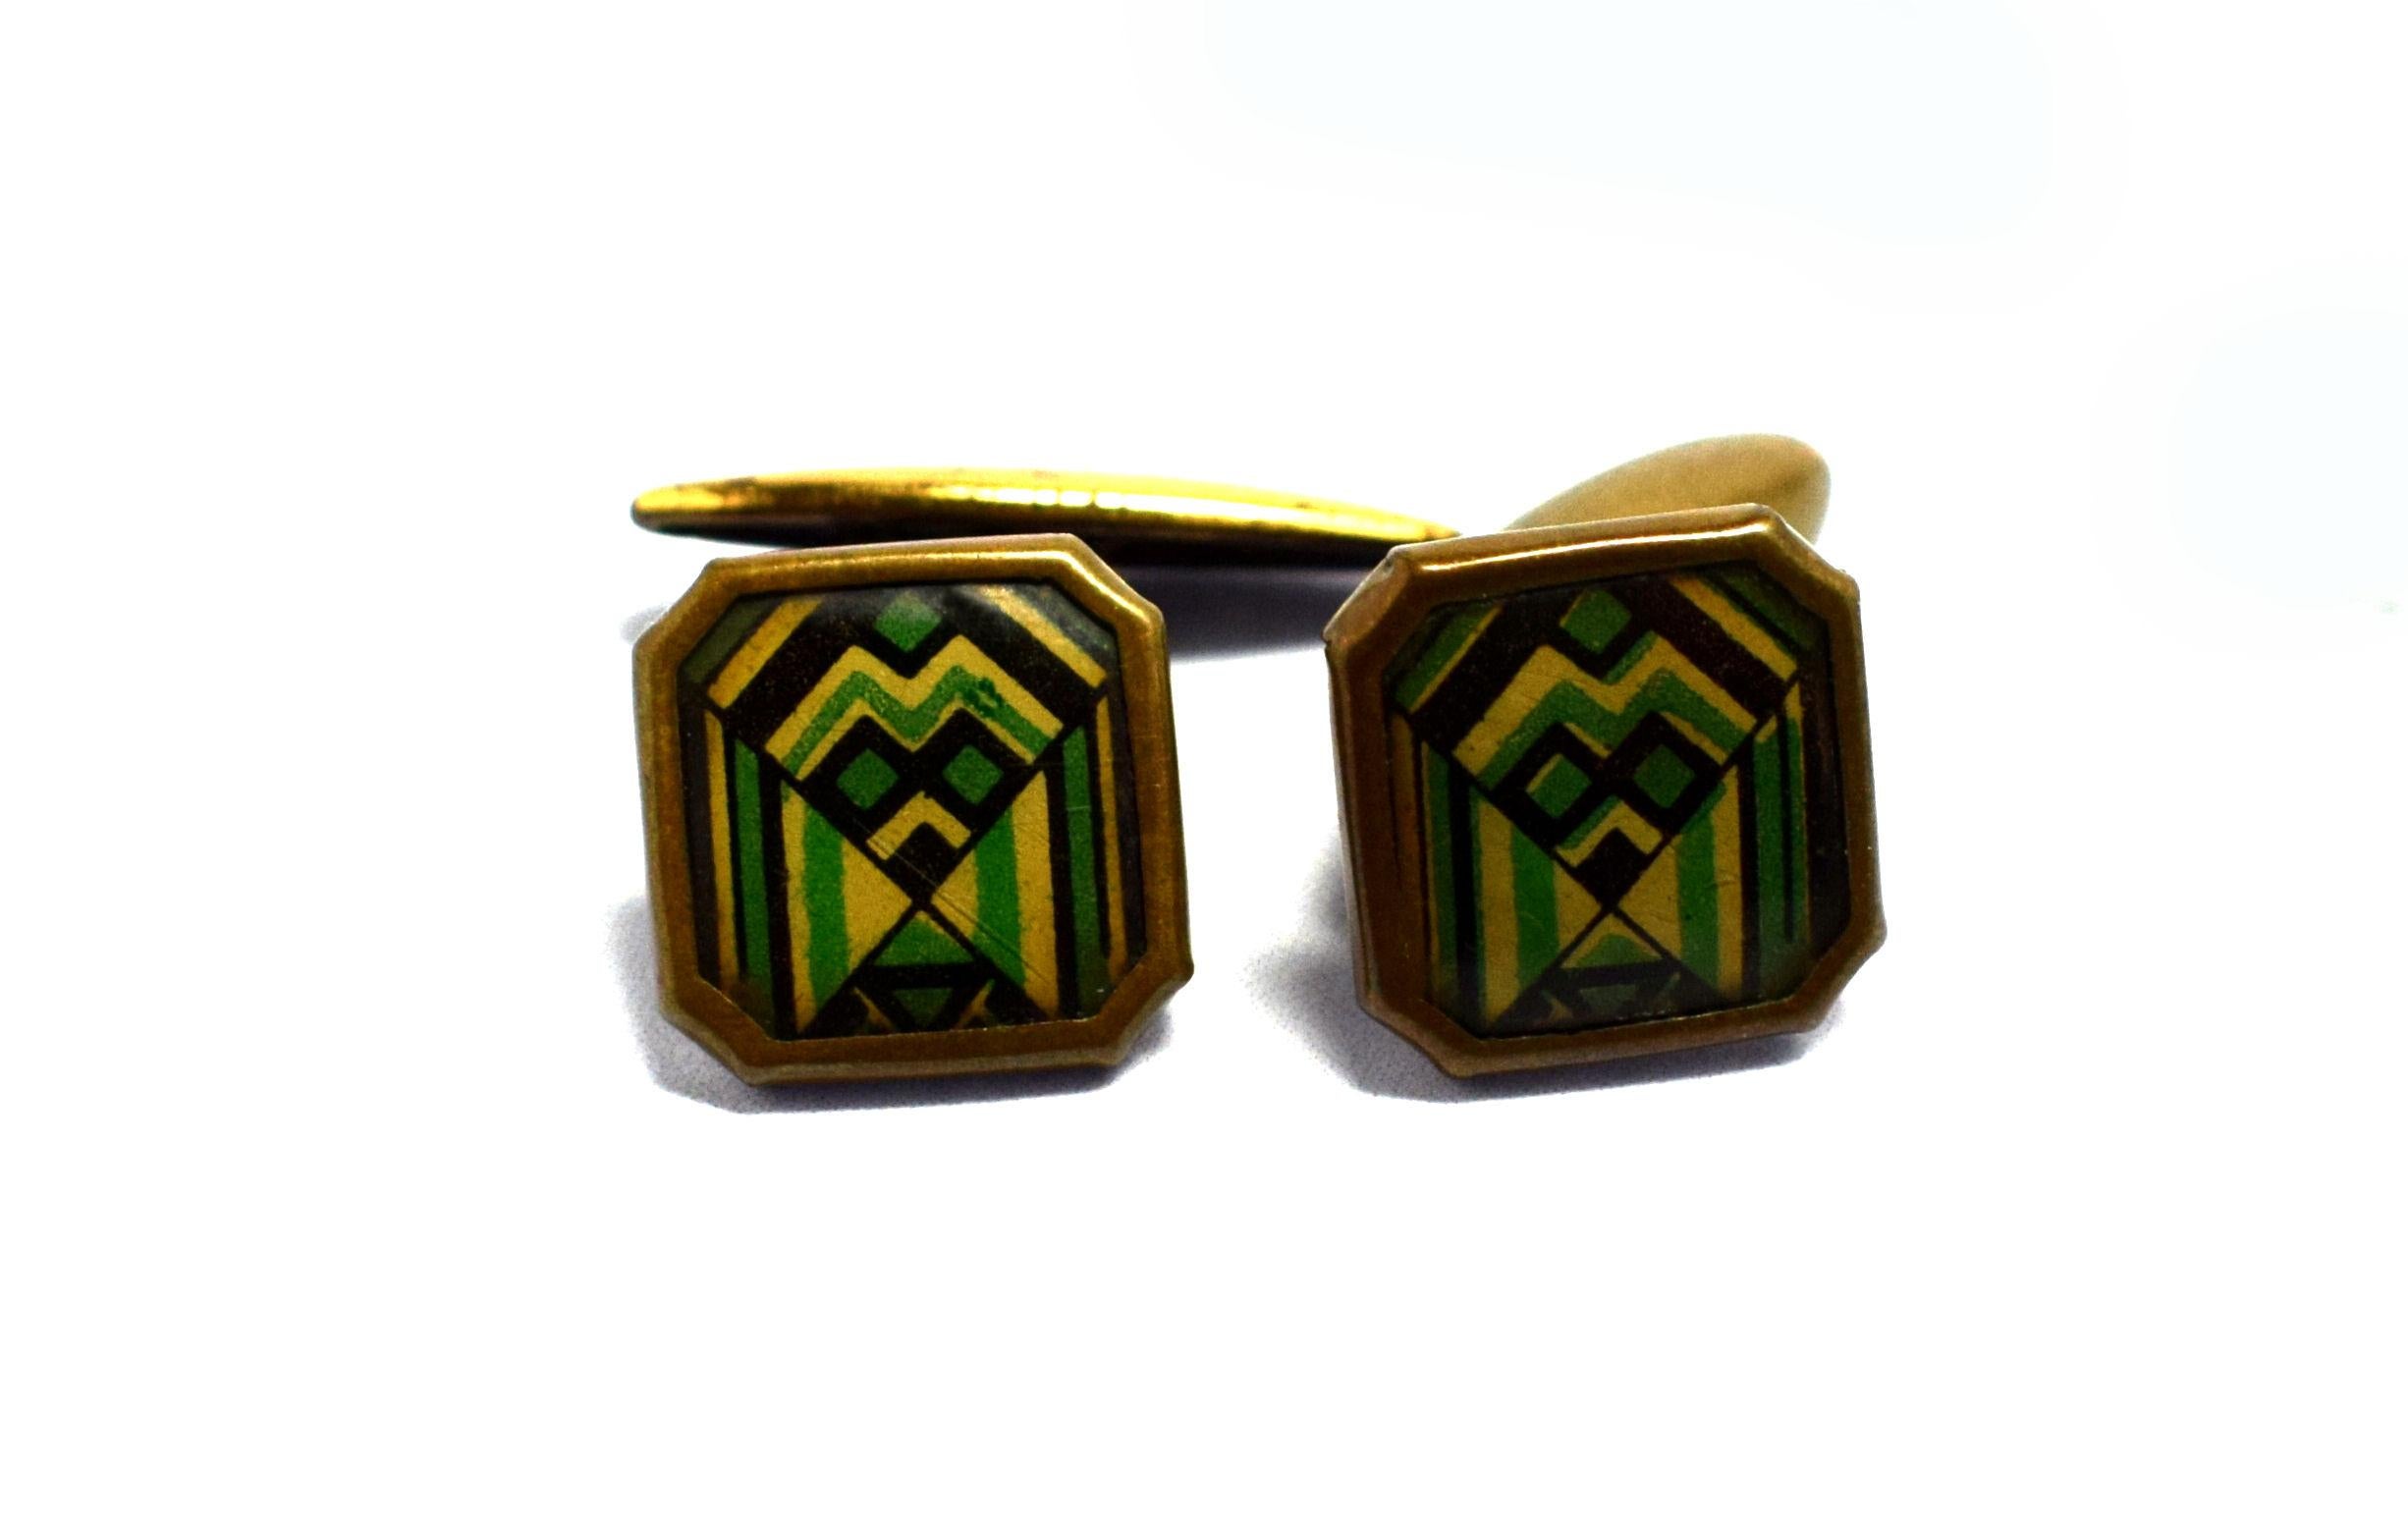 Extremely stylish and totally original are these matching pair of English 1930s Art Deco modernist enamel gents cufflinks. Fabulous geometric patterning and color, with a slight modernist feel. Condition is very good with only signs of age to the